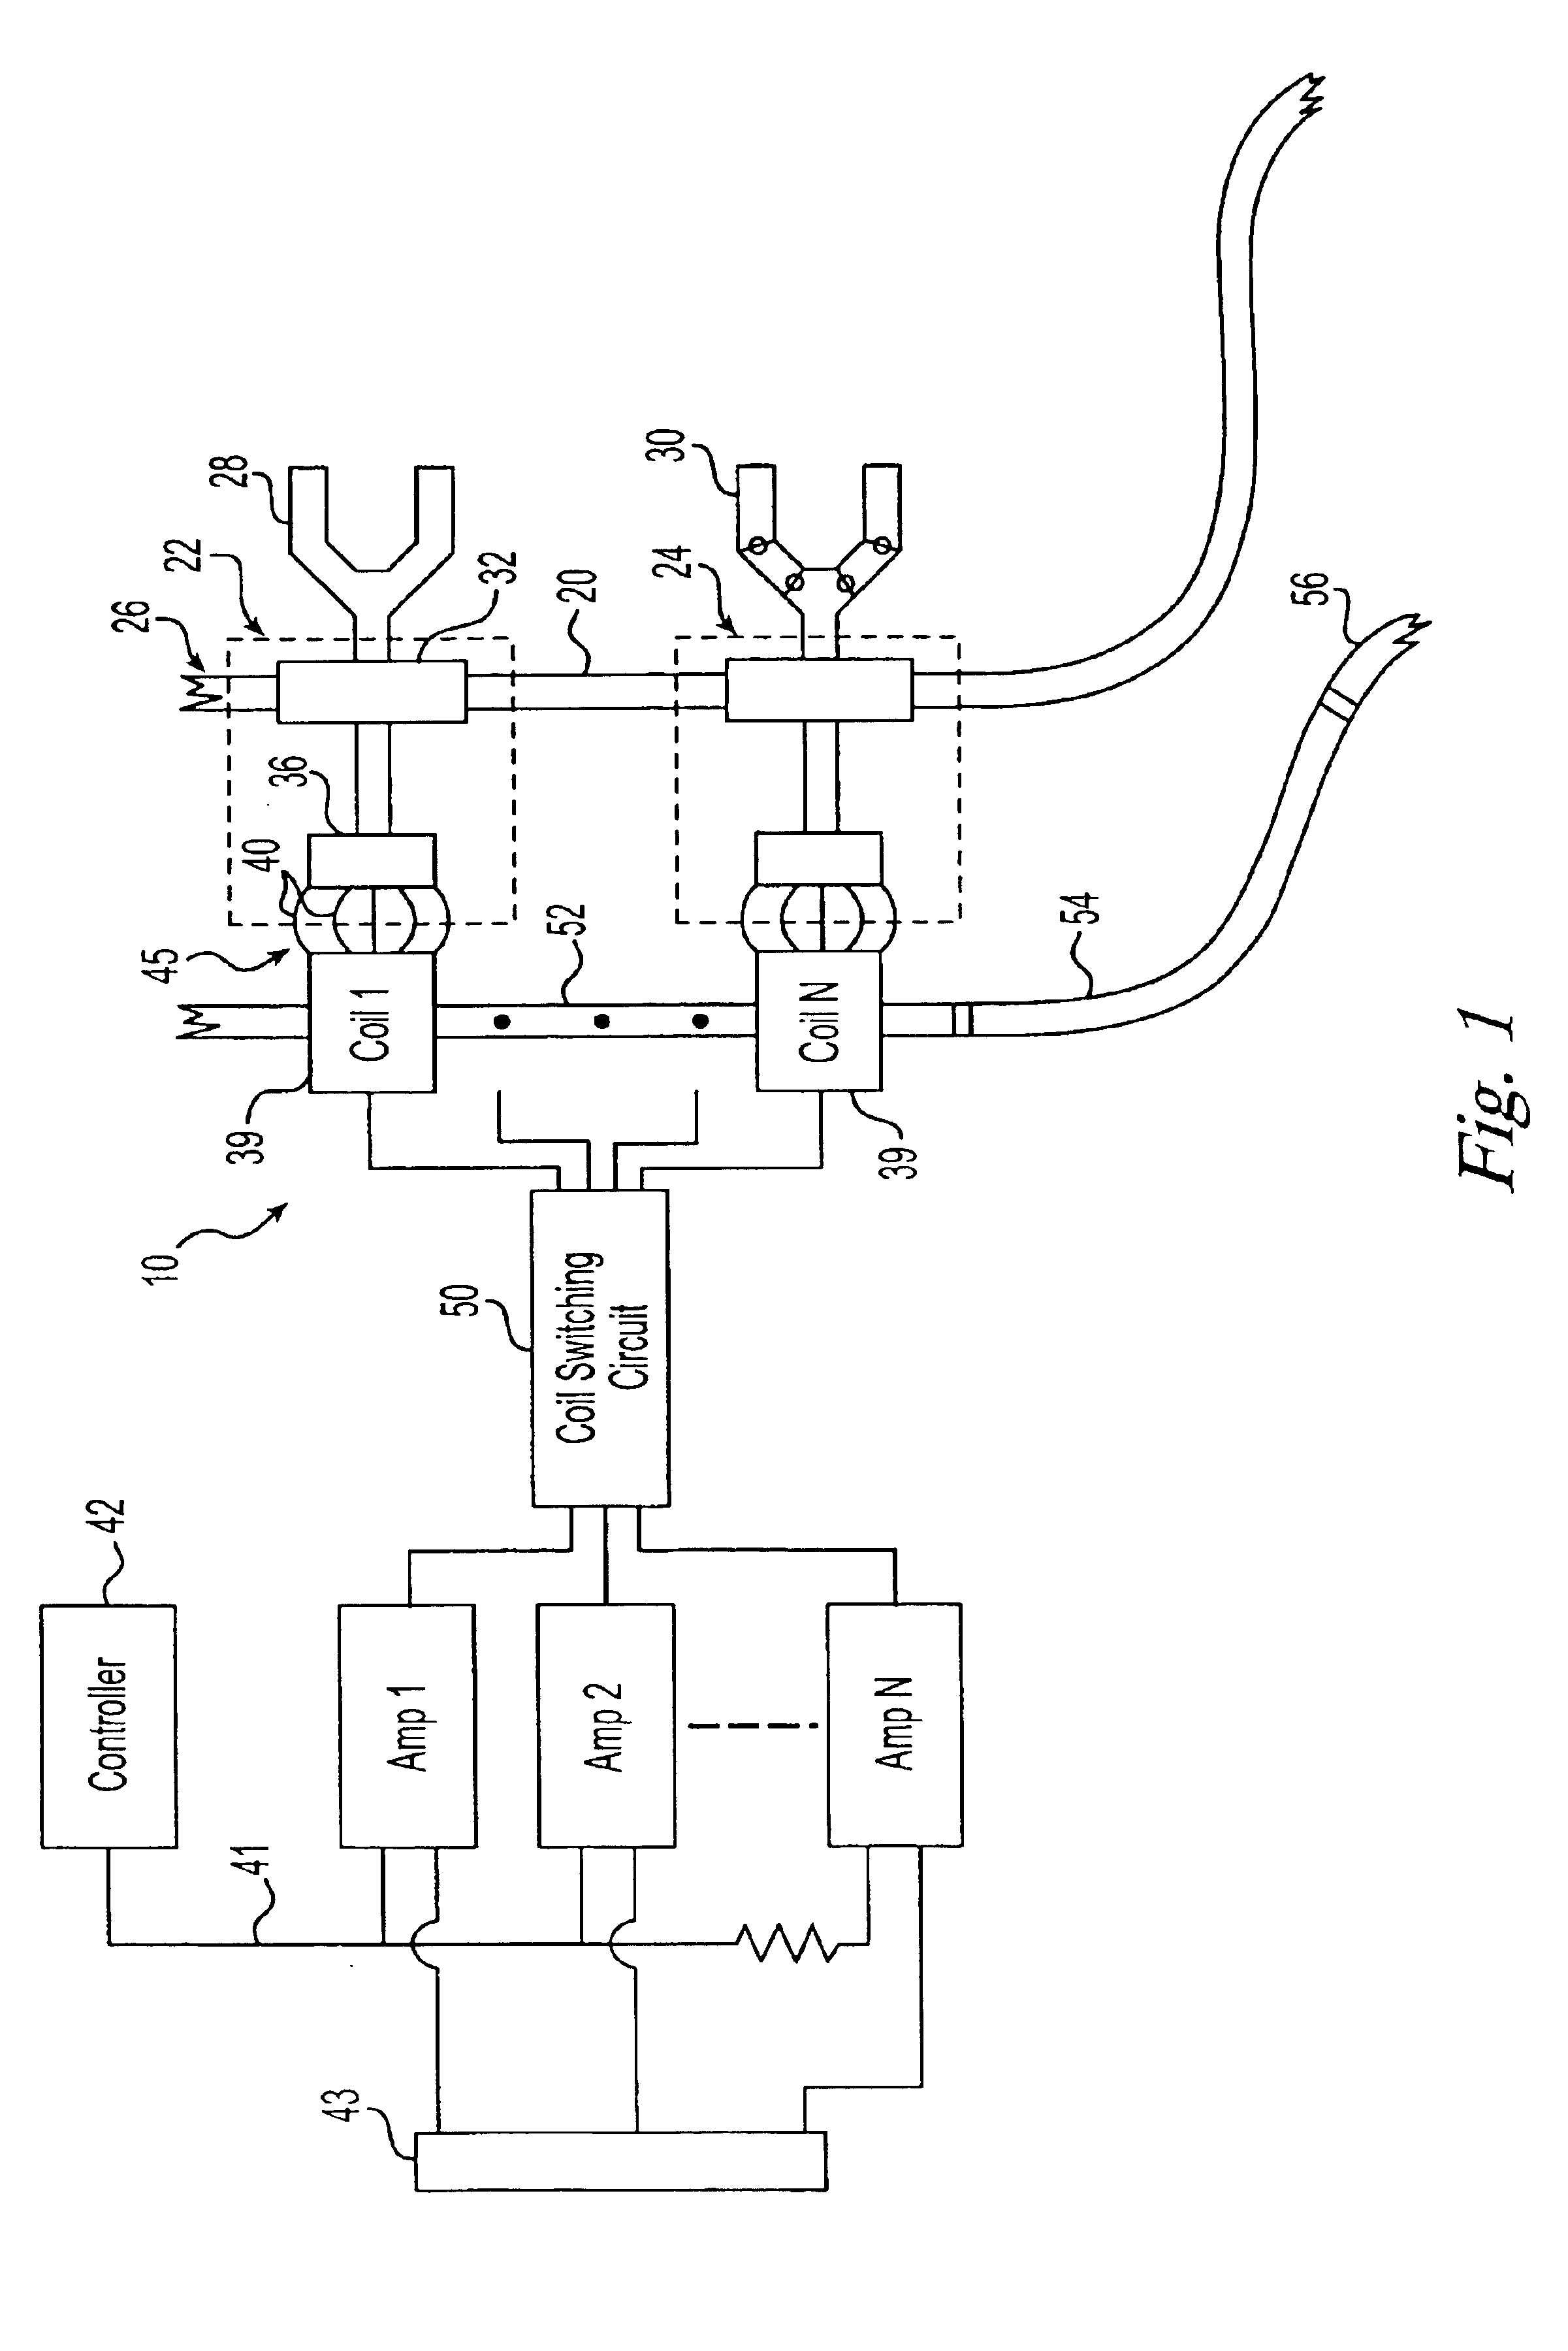 Variable motion system and method